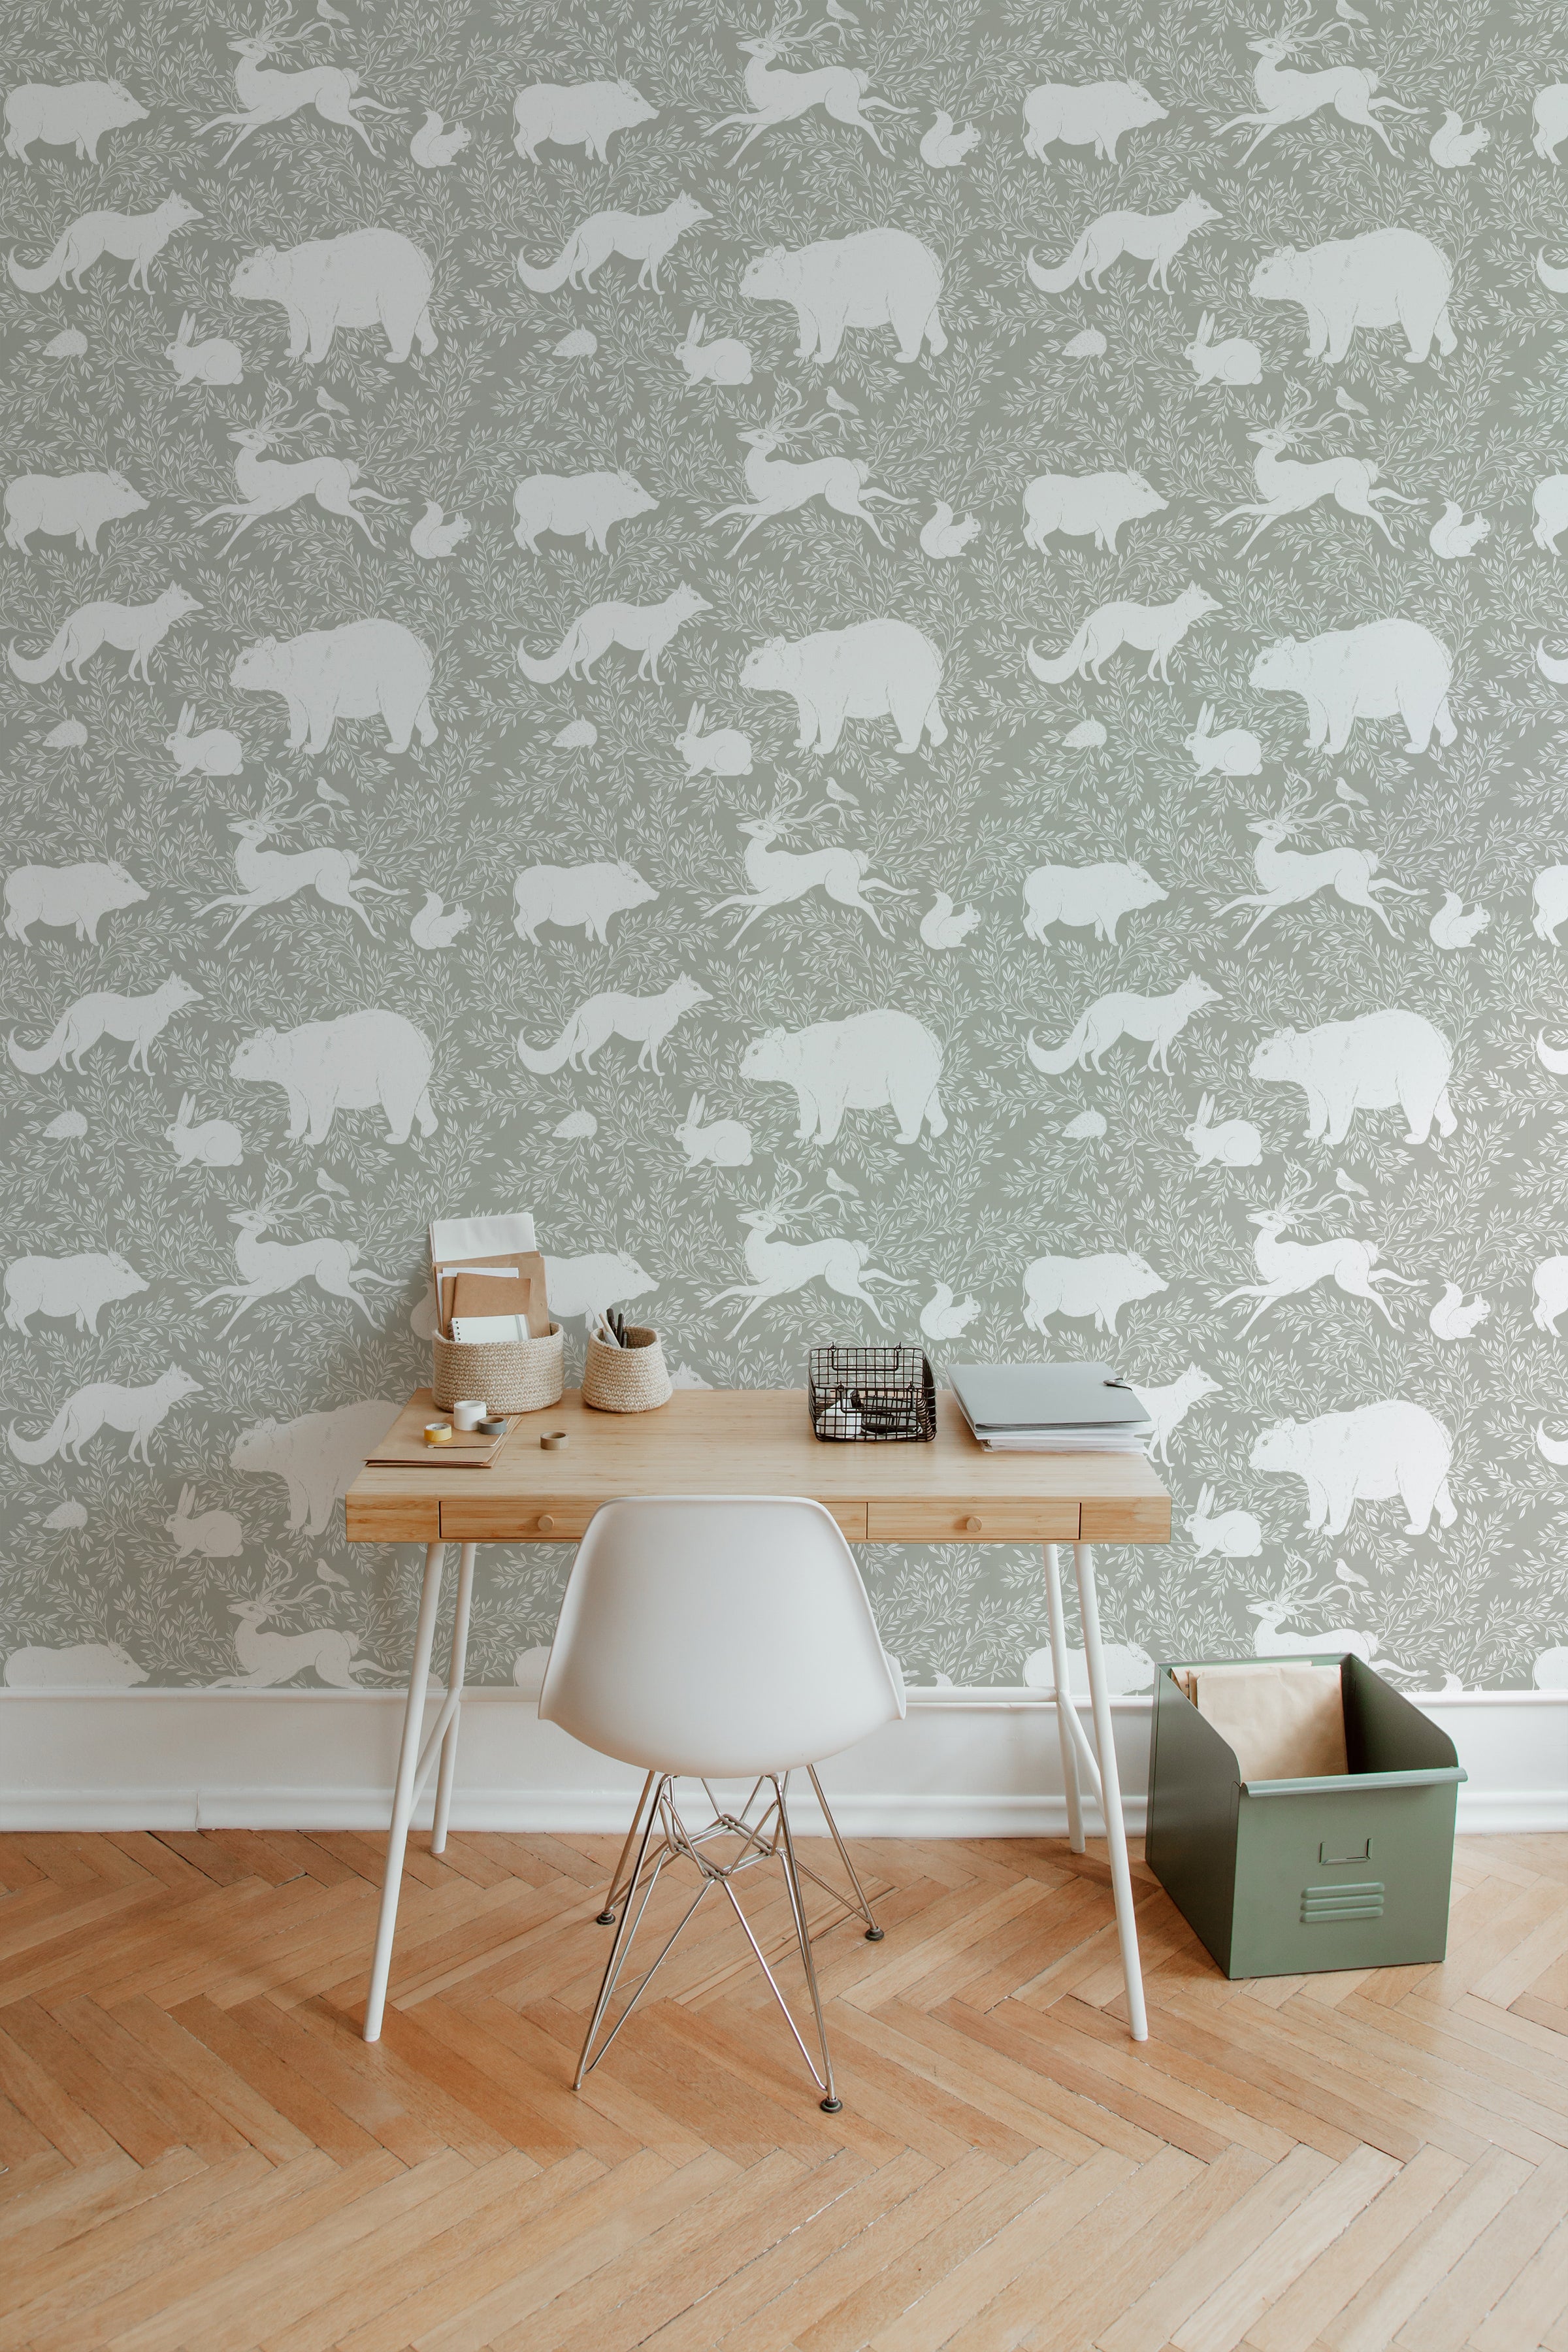 A home office with a light wooden desk and white chair placed against a green wallpaper adorned with white woodland animals including bears, foxes, and rabbits. The wallpaper provides a serene and natural backdrop.